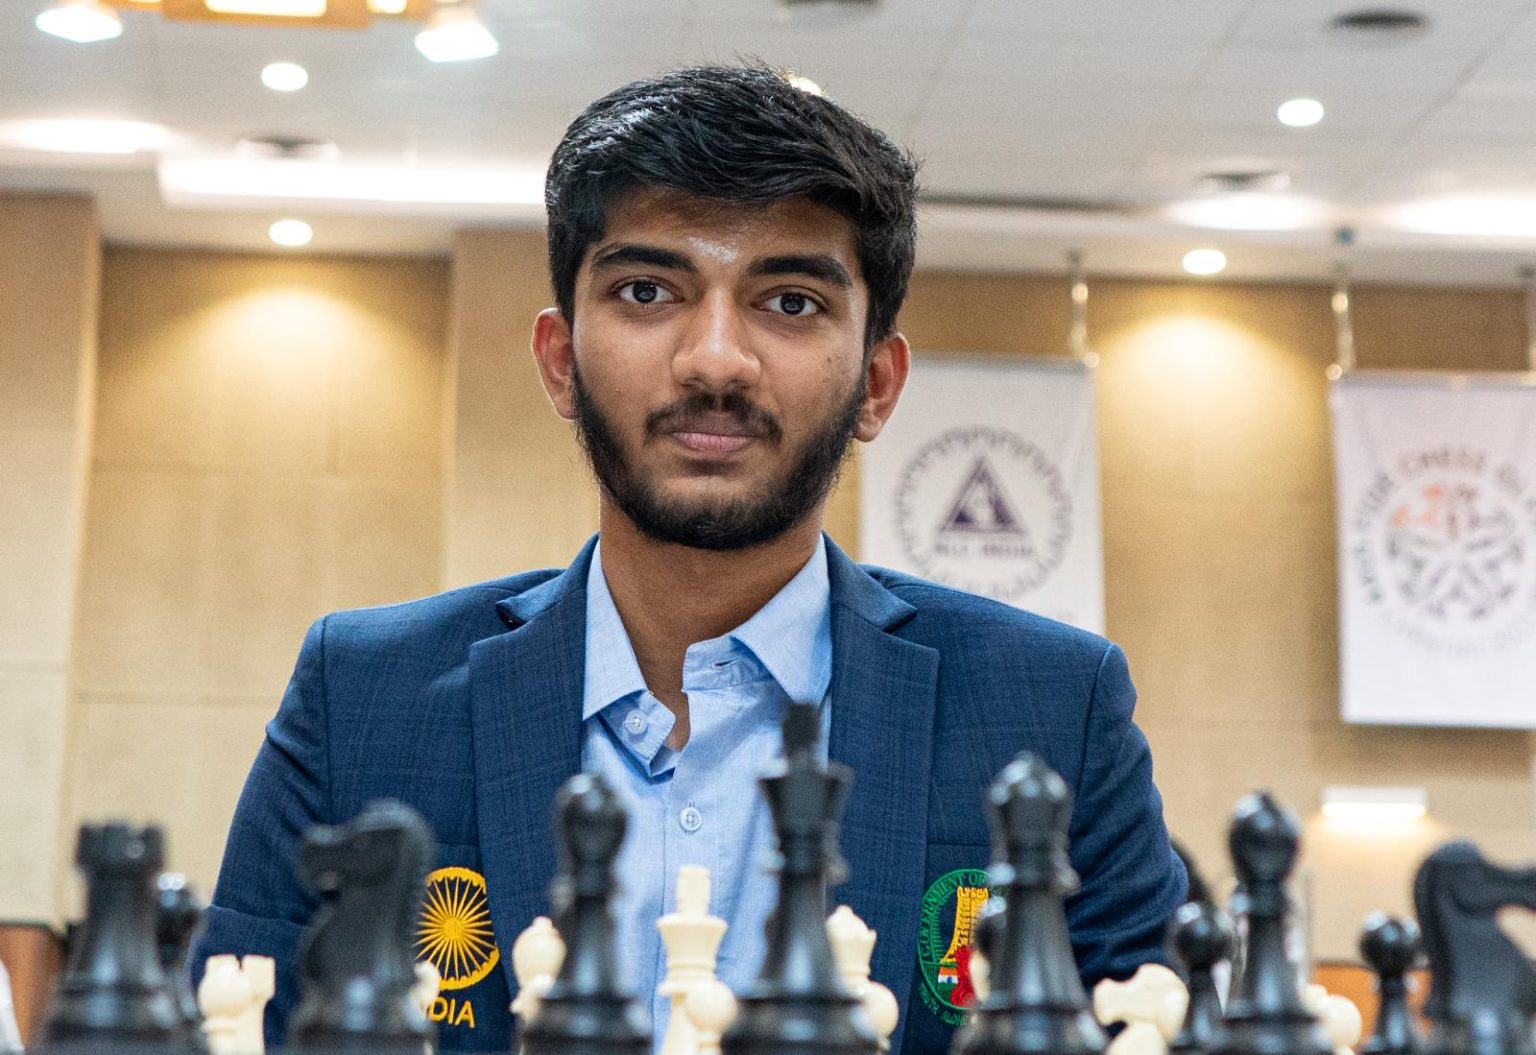 Gukesh D, chess prodigy, Candidates Tournament, Indian chess player, FIDE Rankings, World Rapid Chess Championships, chess history, chess achievements, elite chess competition, young grandmaster, chess prodigy achievements, chess World Cup 2023, prodigy vs Magnus Carlsen, Indian chess talent, chess records, youngest grandmaster, chess tournament qualifications, Gukesh D's rise, chess sensation, India's chess future